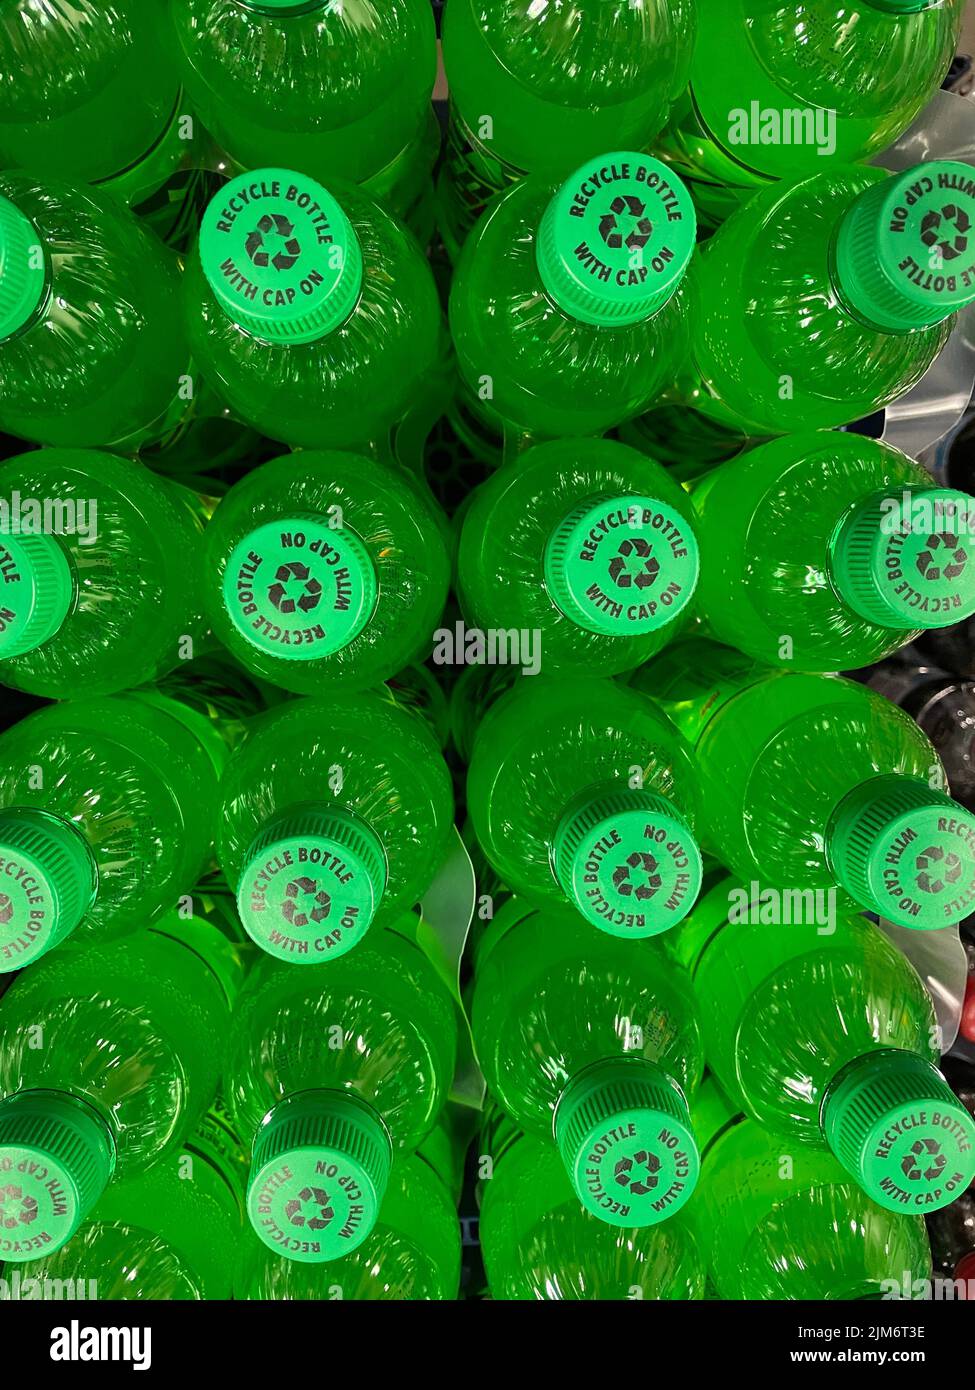 Grovetown, Ga USA - 12 21 21: Retail grocery store flat lay green bottle tops Stock Photo